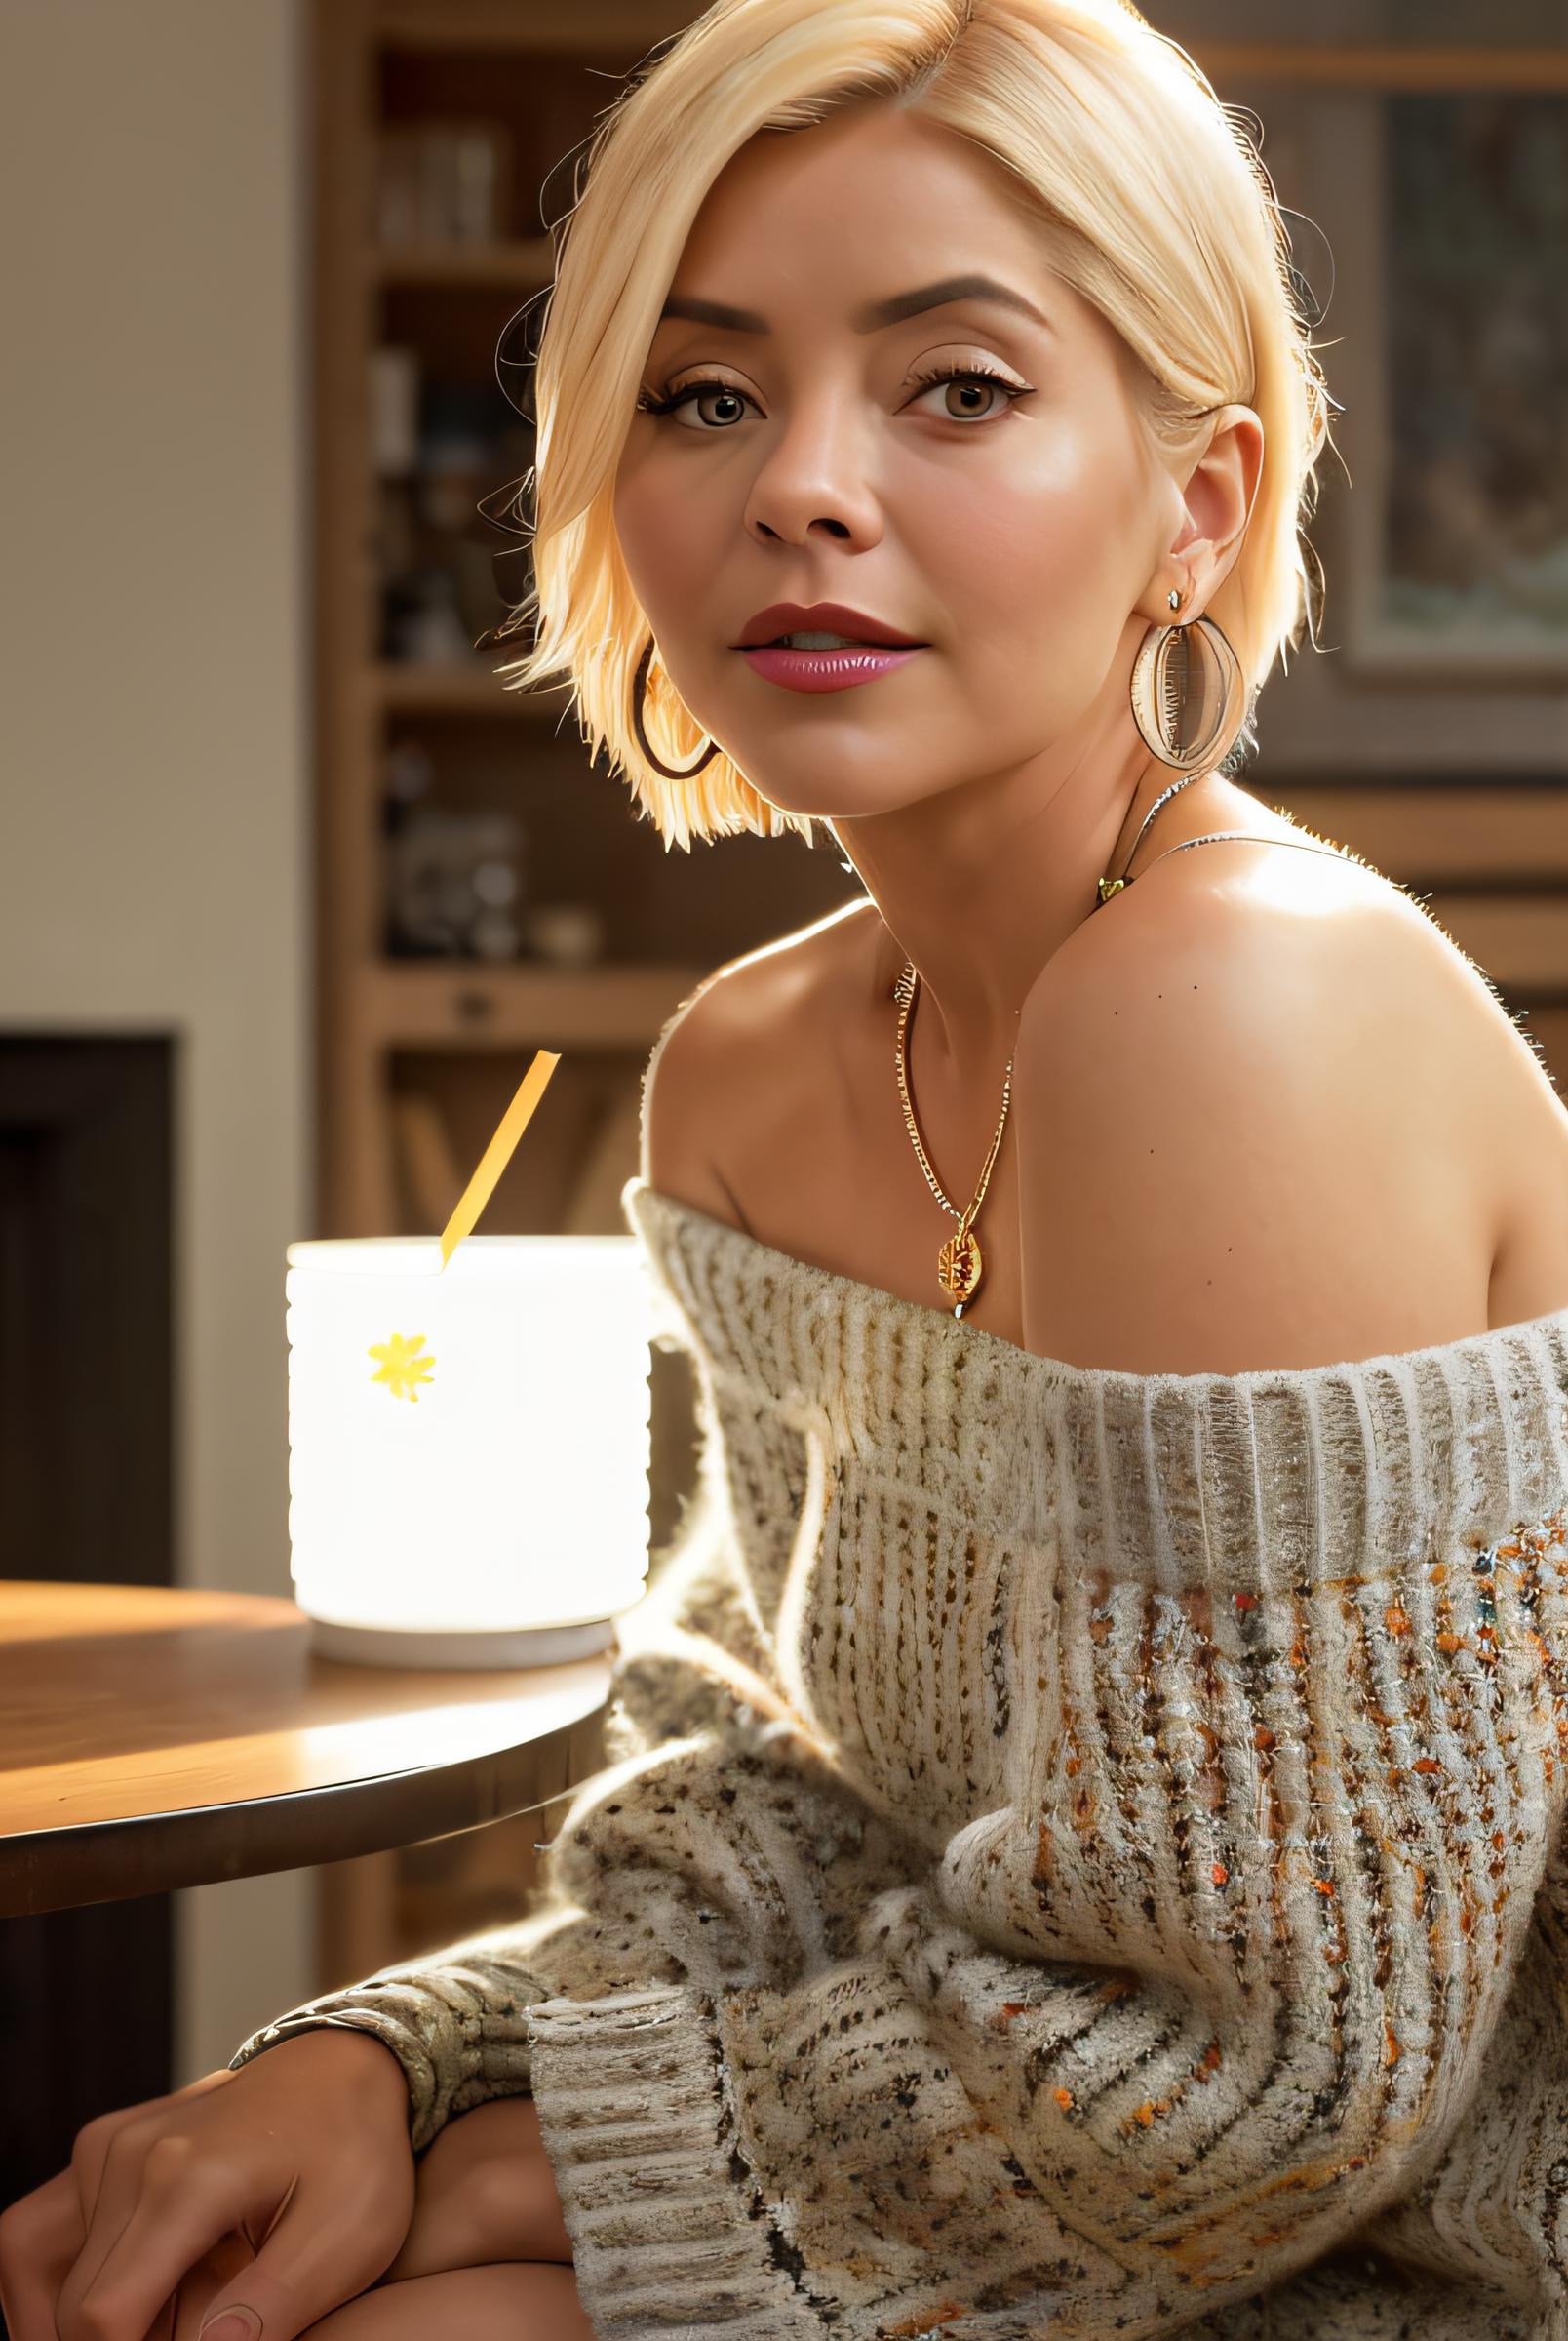 Holly Willoughby - Textual Inversion image by ElizaPottinger